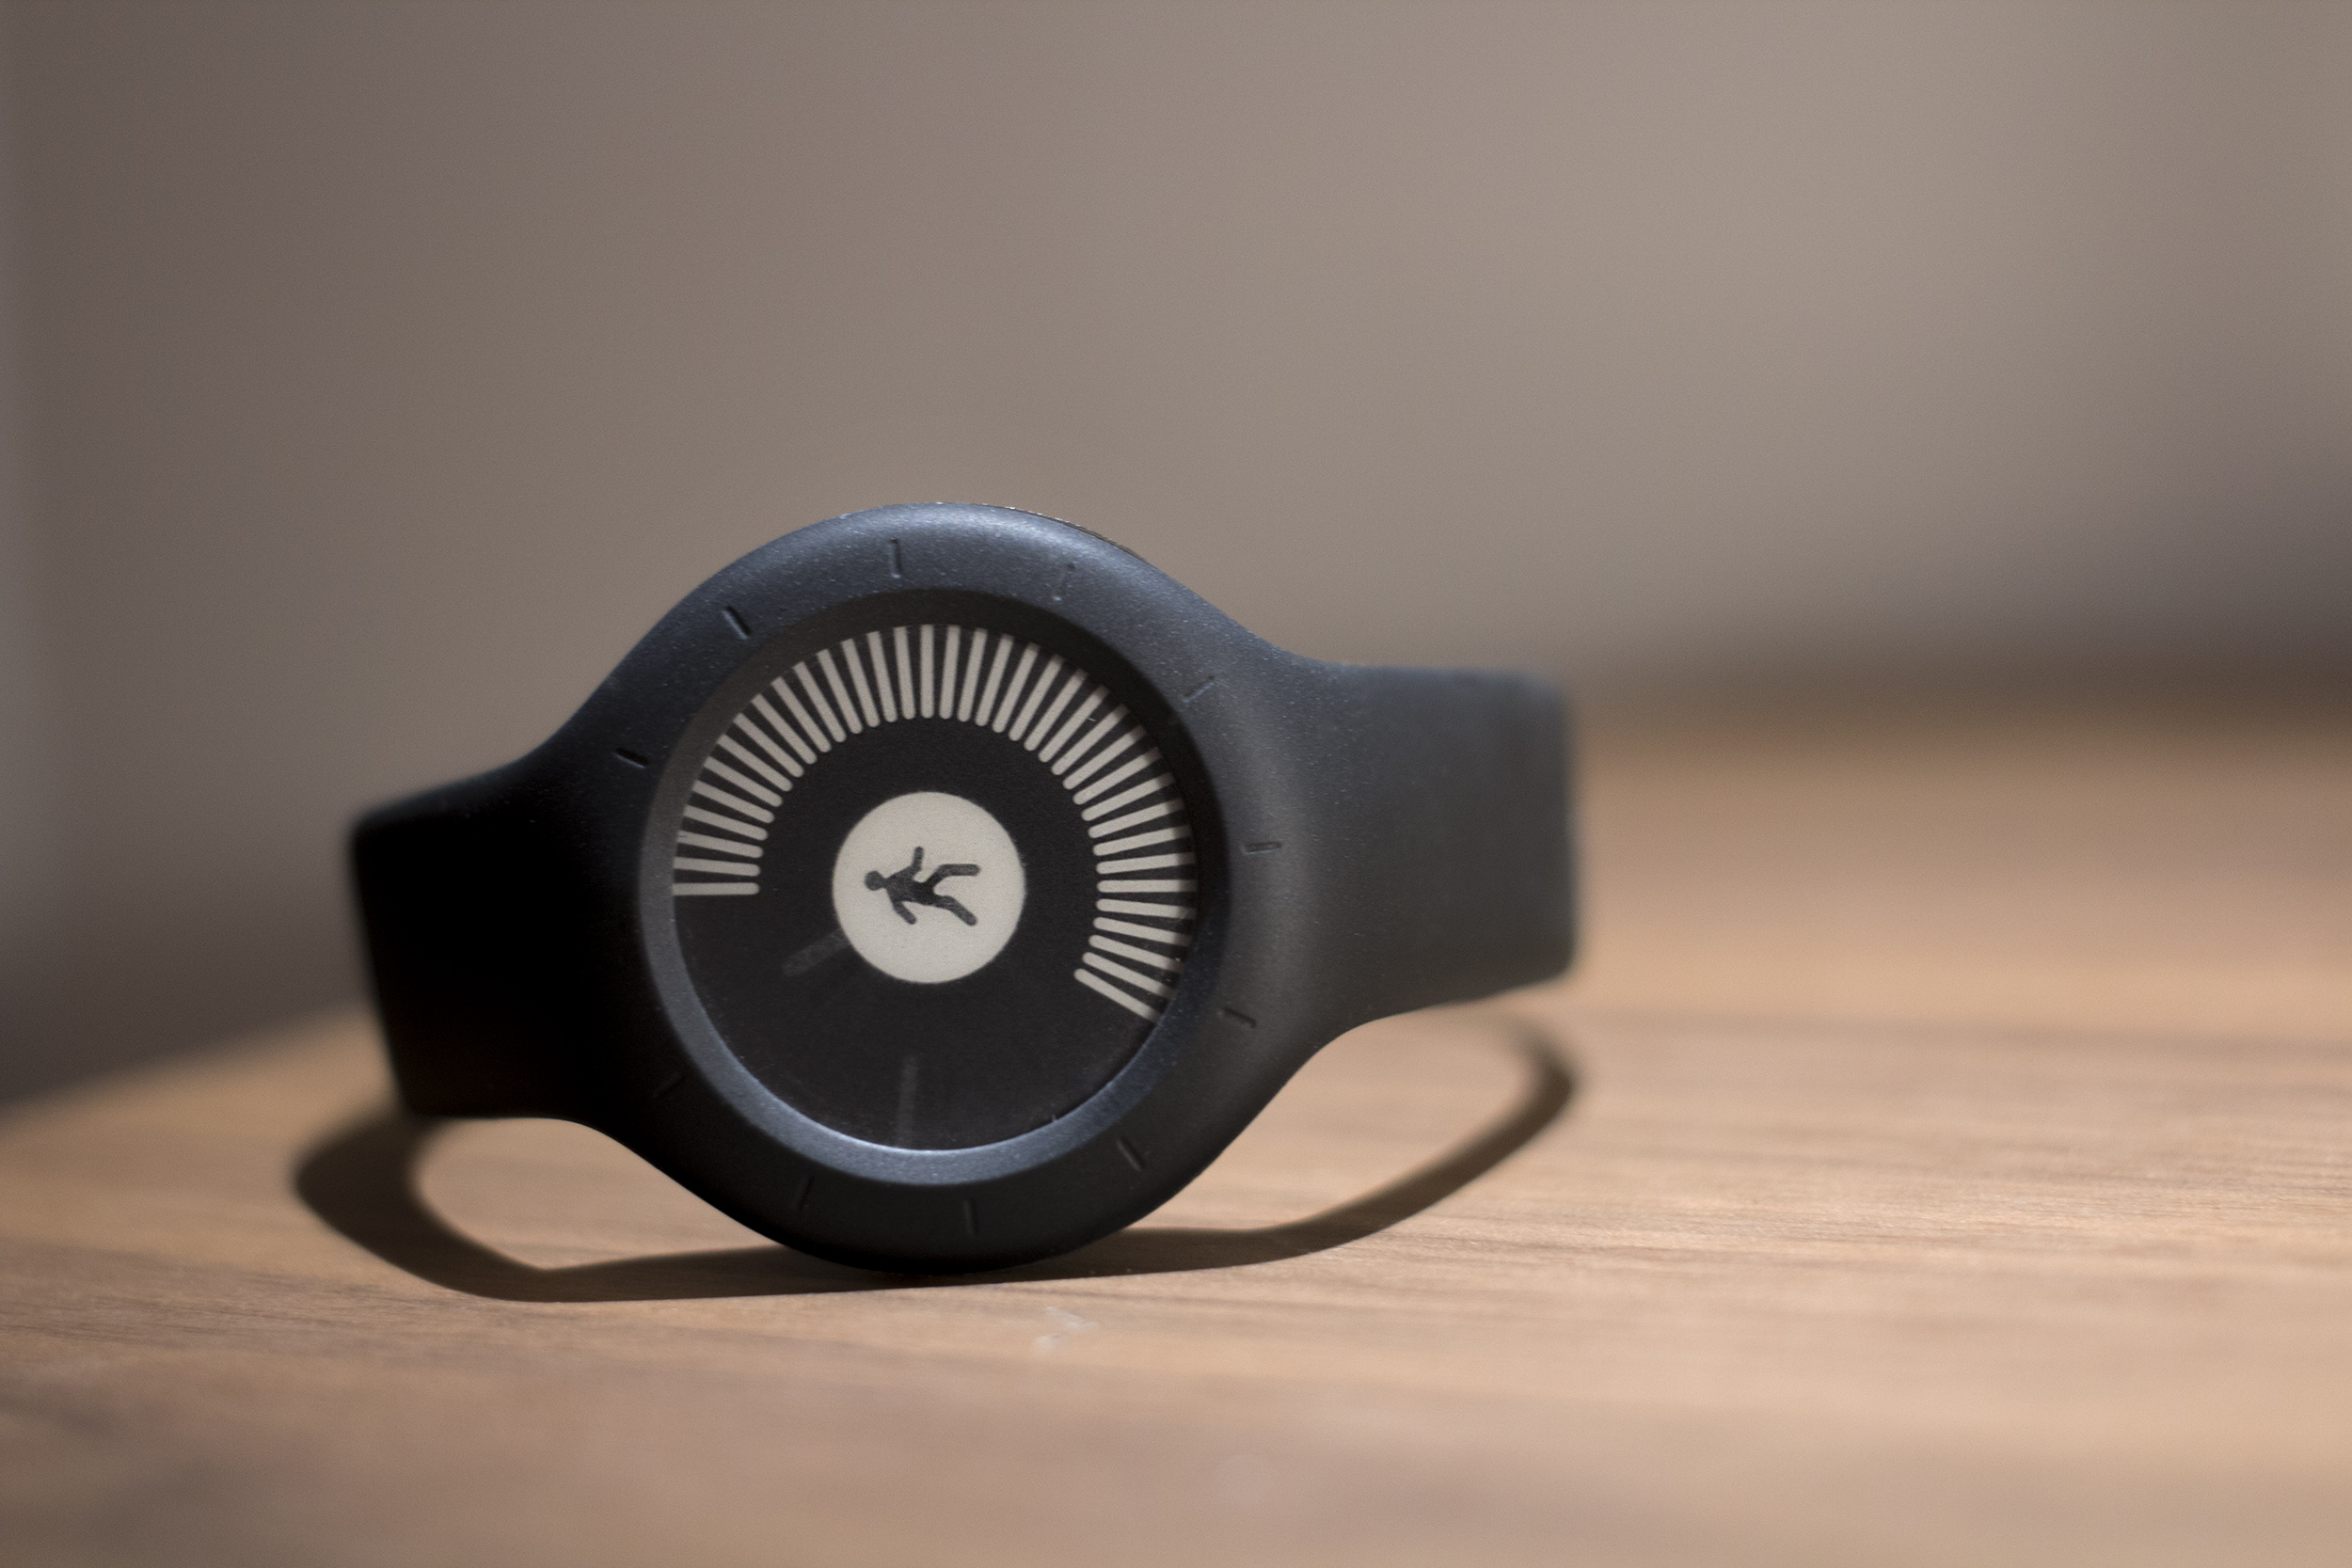 Withings Go wearable